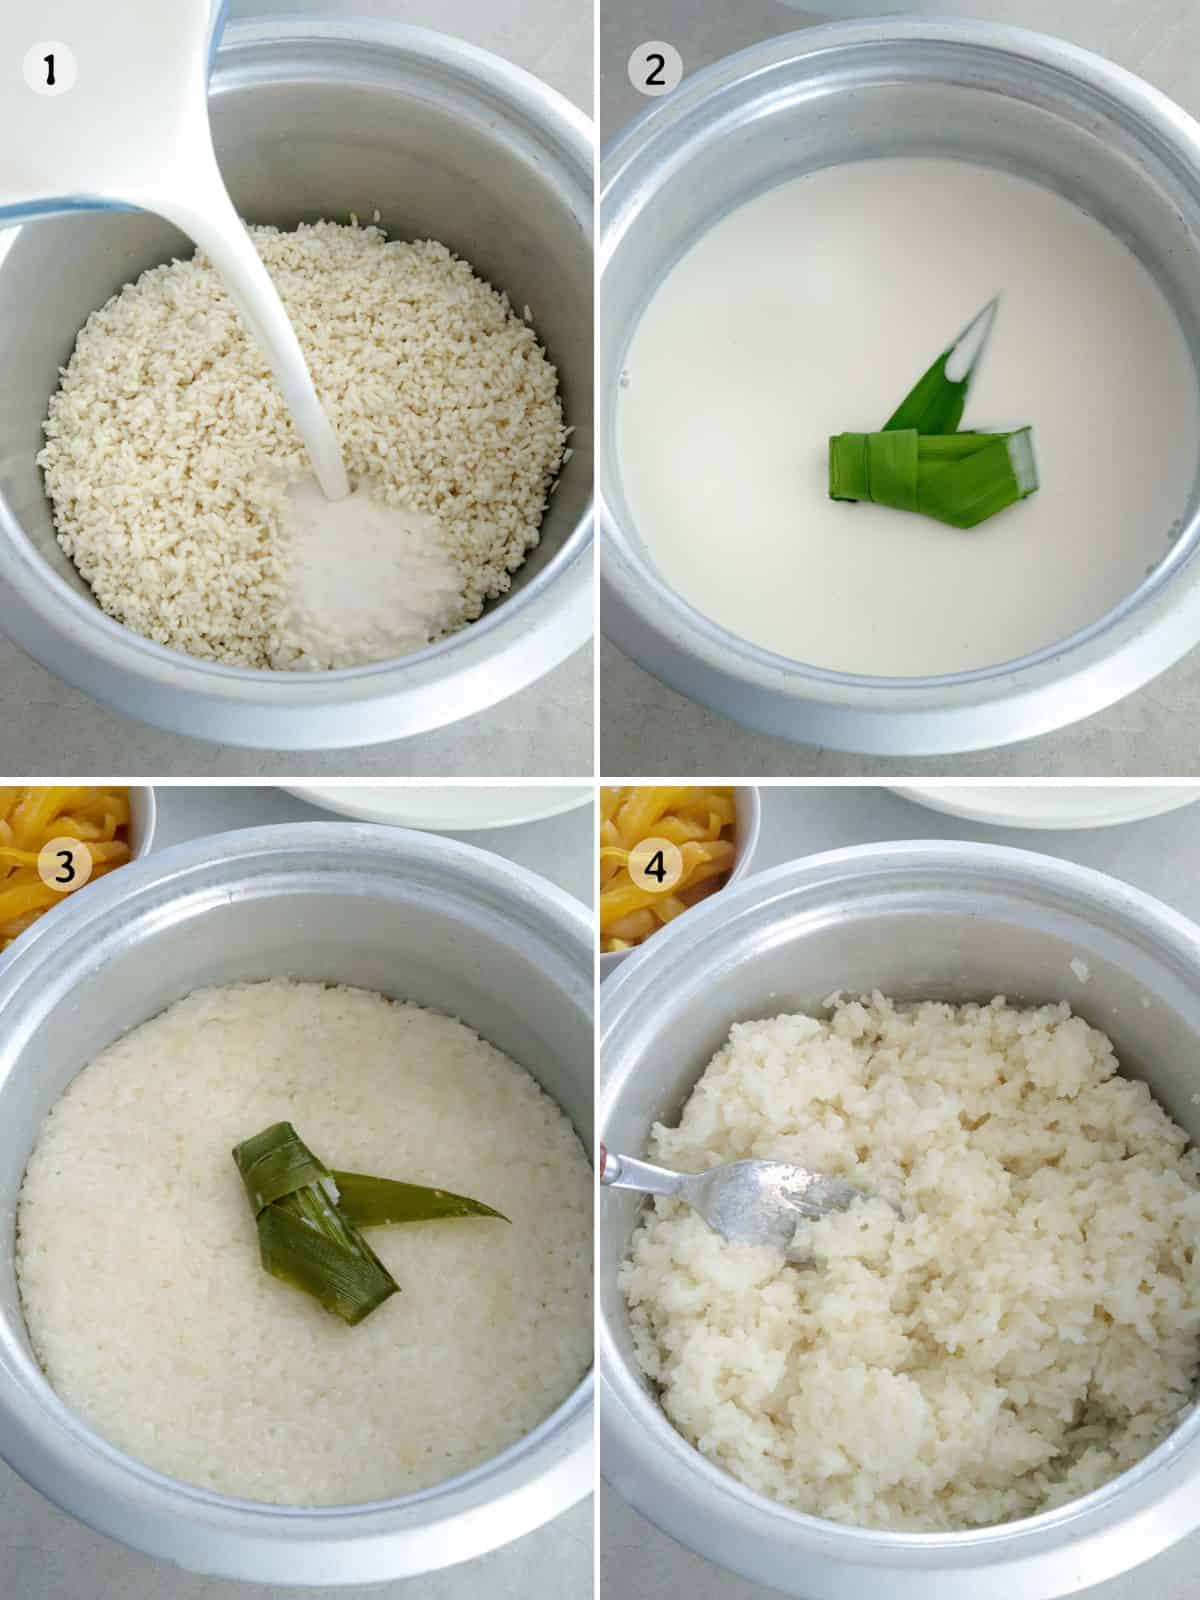 cooking glutinous rice in the rice cooker.